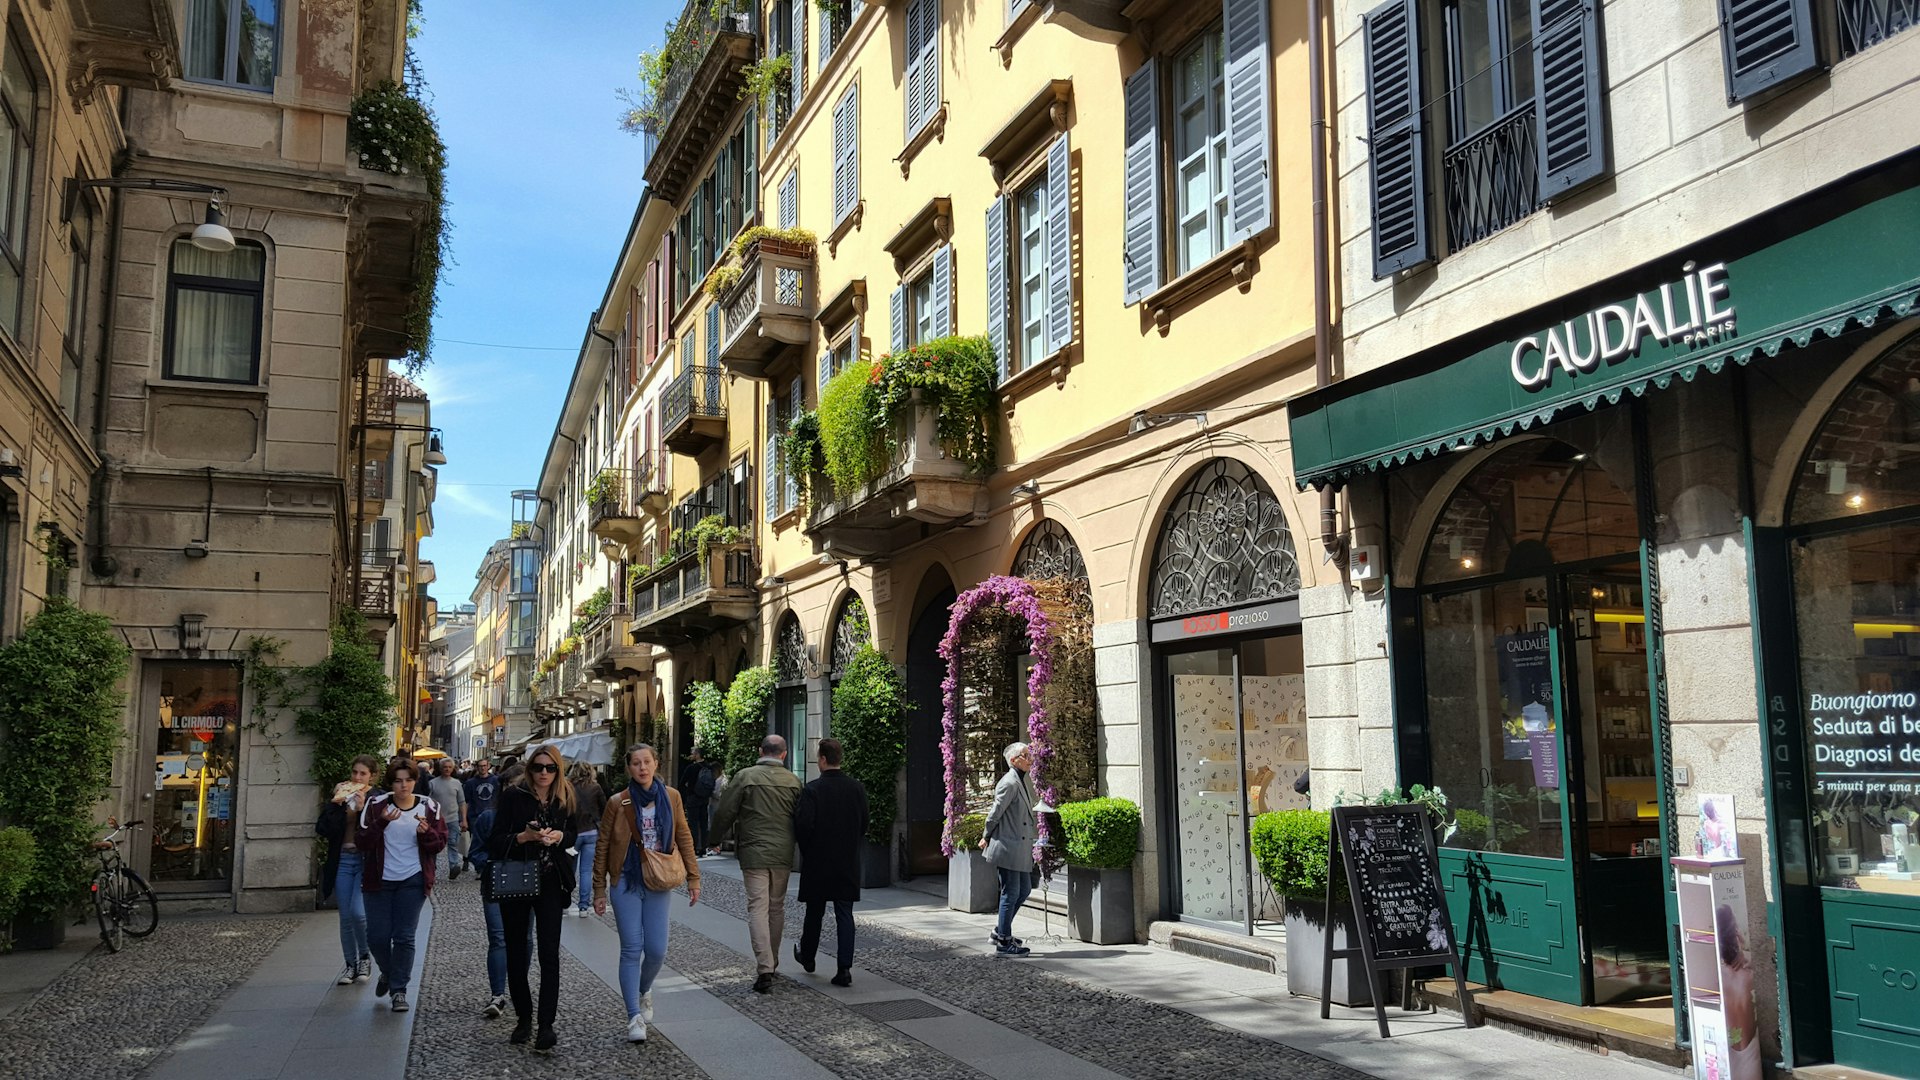 Old-fashioned cobbled street with shops and cafes in the Brera district in Milan, Italy